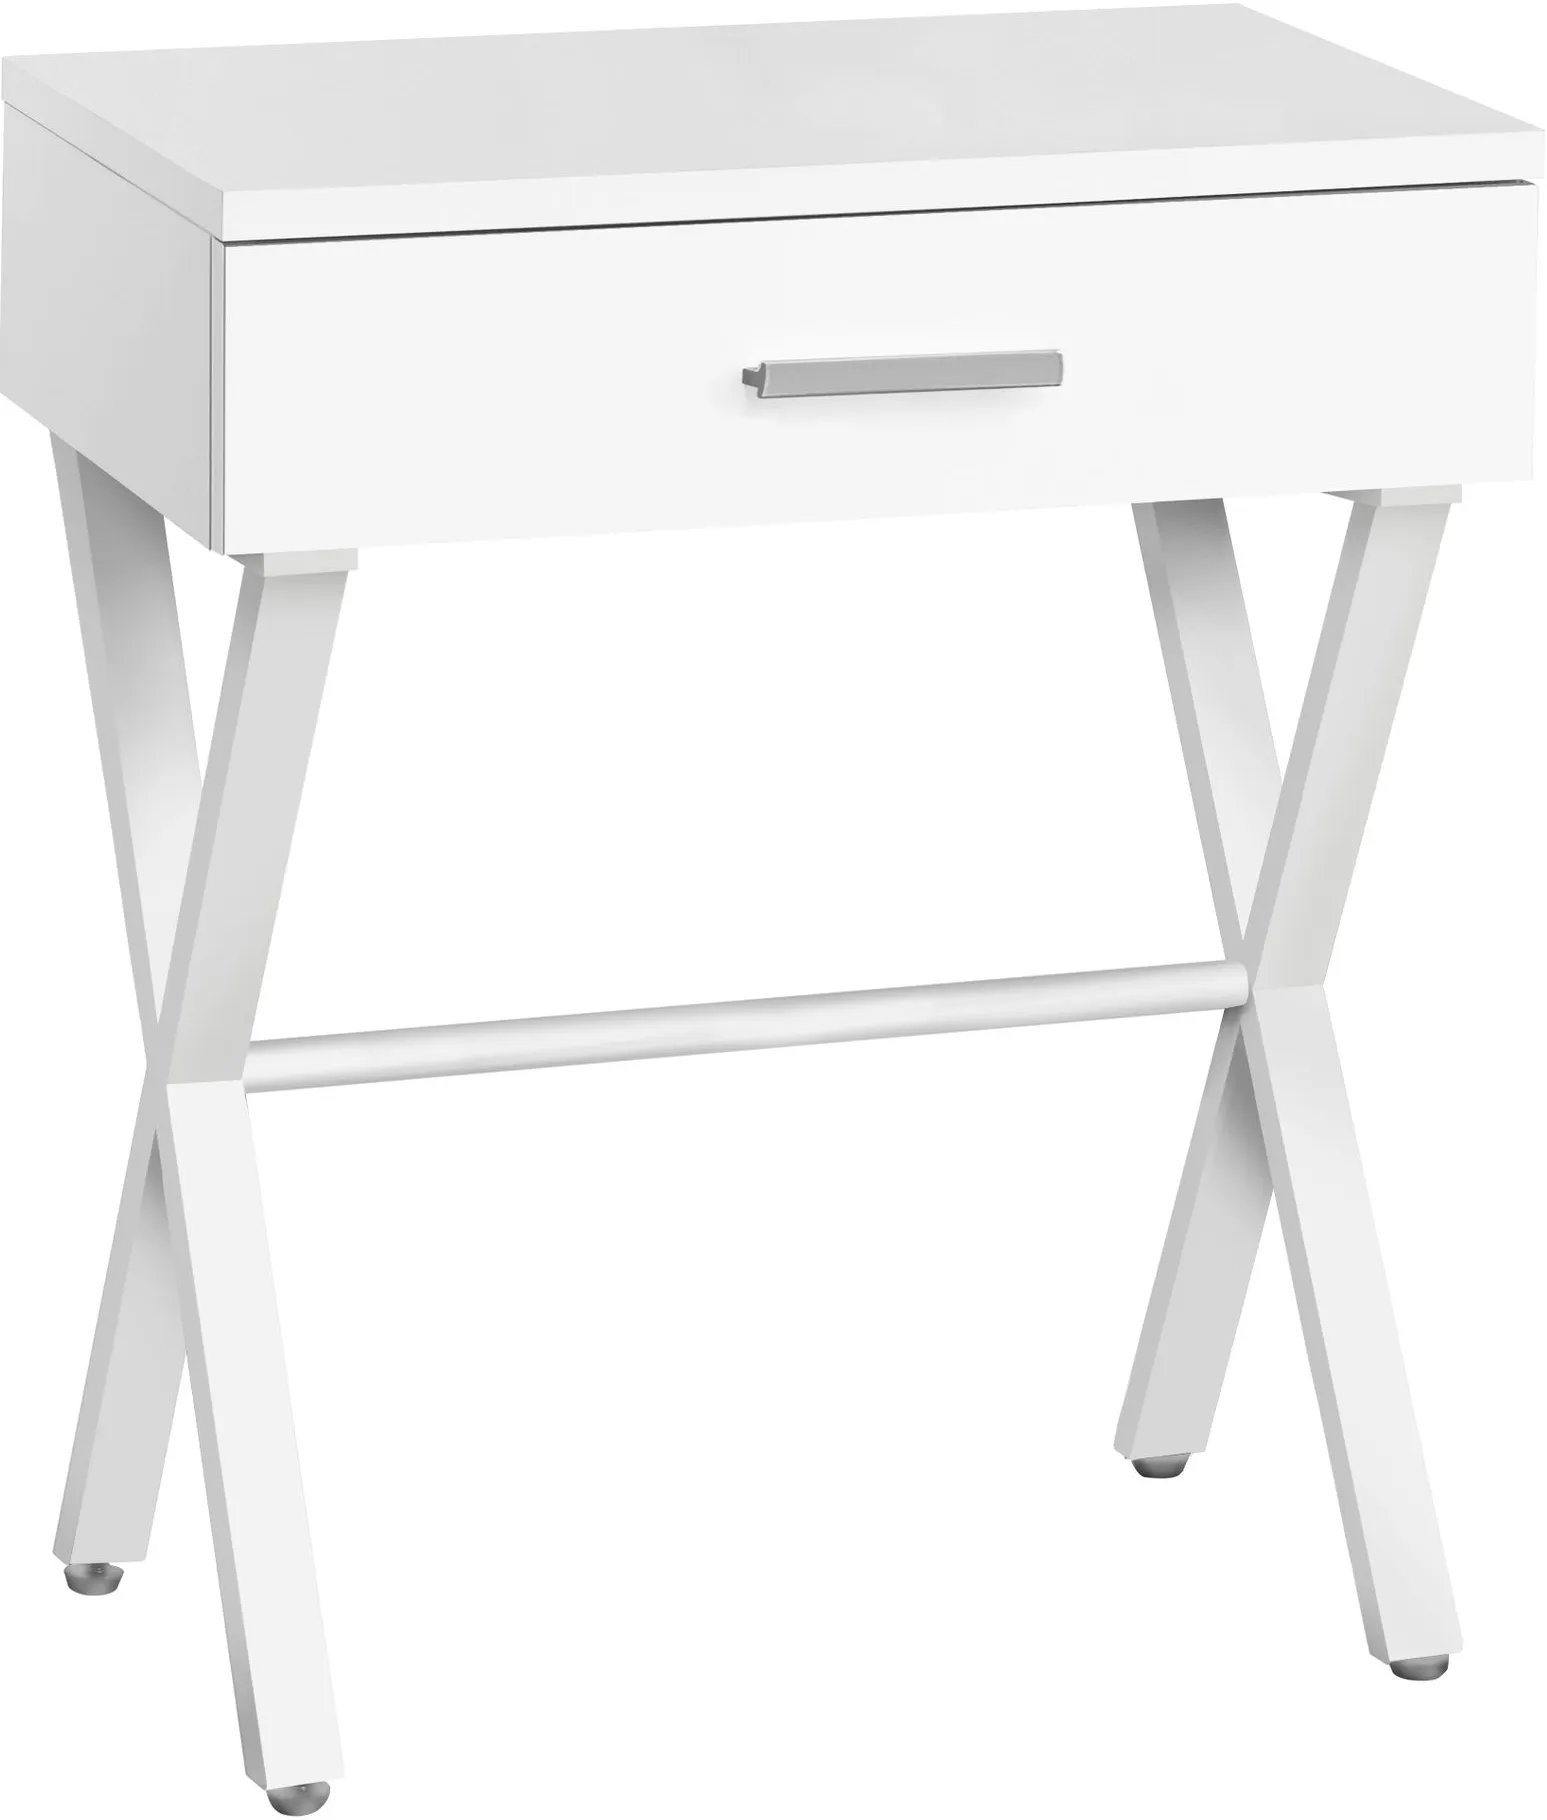 Accent Table, Side, End, Nightstand, Lamp, Storage Drawer, Living Room, Bedroom, Metal, Laminate, White, Contemporary, Modern